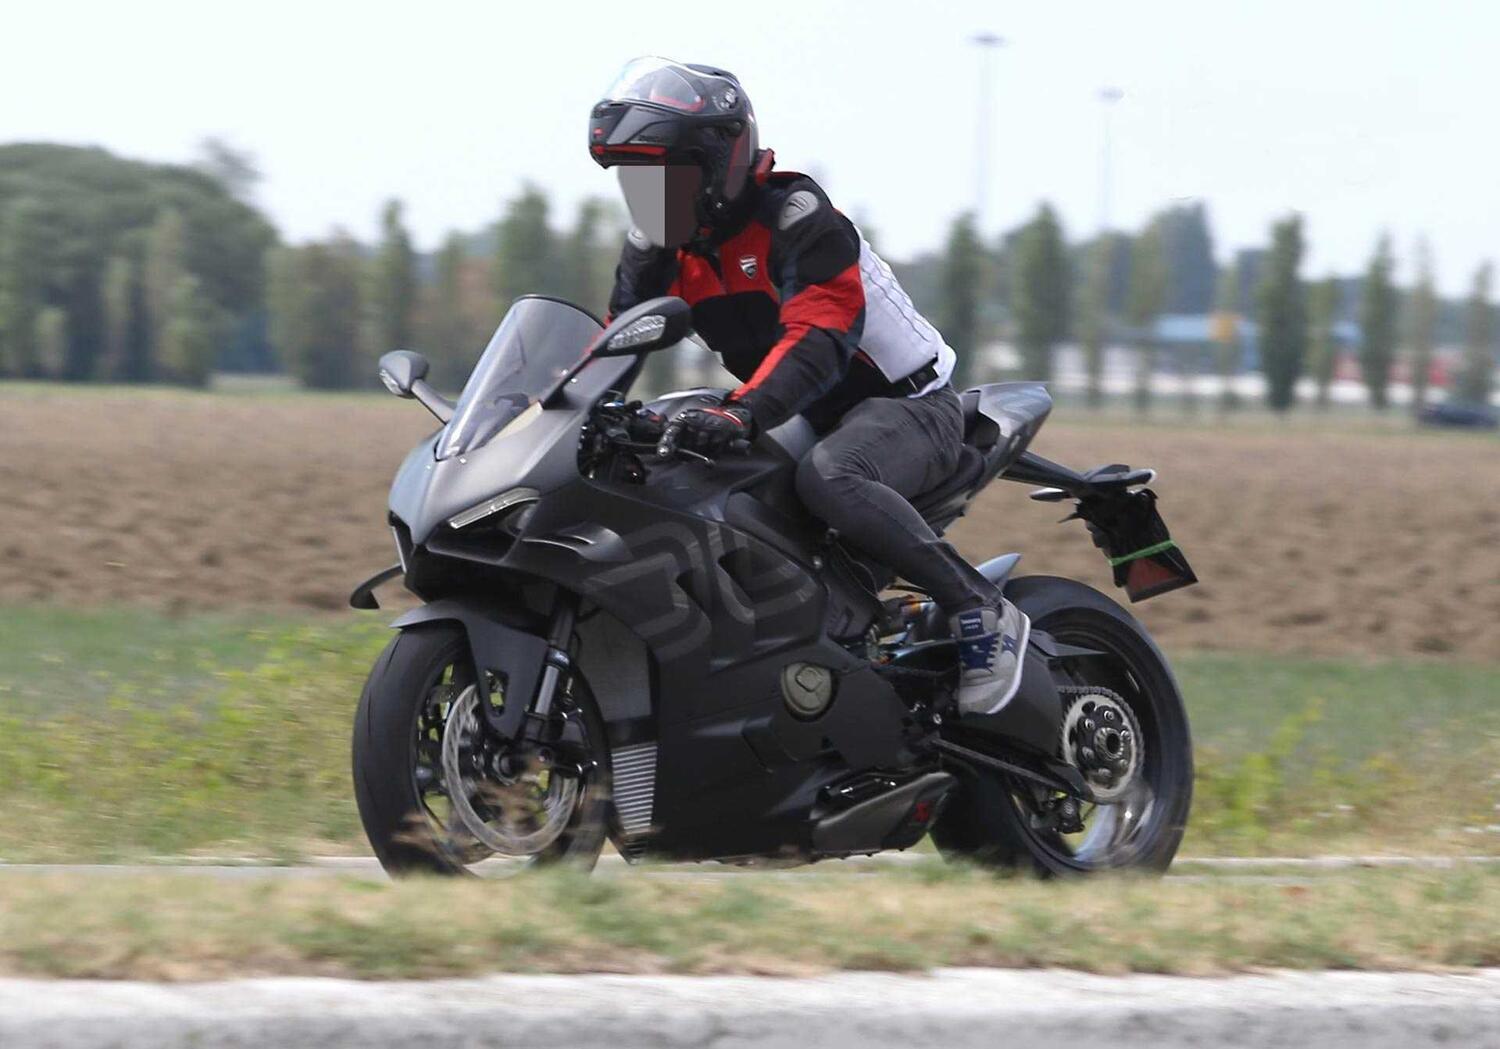 [Street] ''This is Racing'': The new Ducati Panigale V4R was seen testing